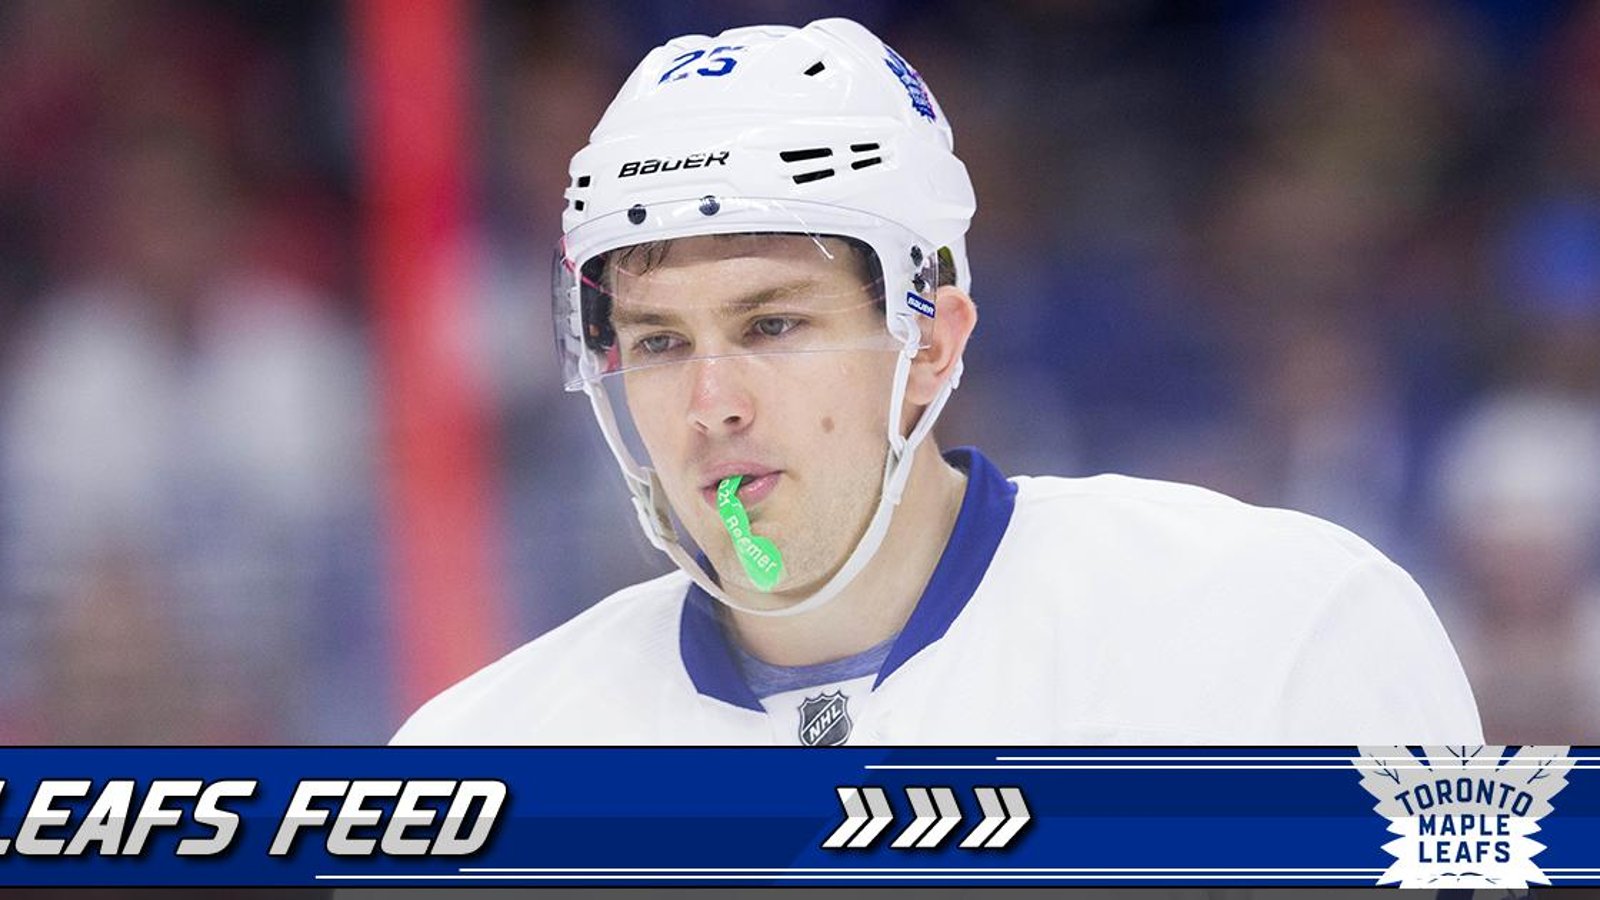 Your call: what should the Leafs do with James van Riemsdyk?